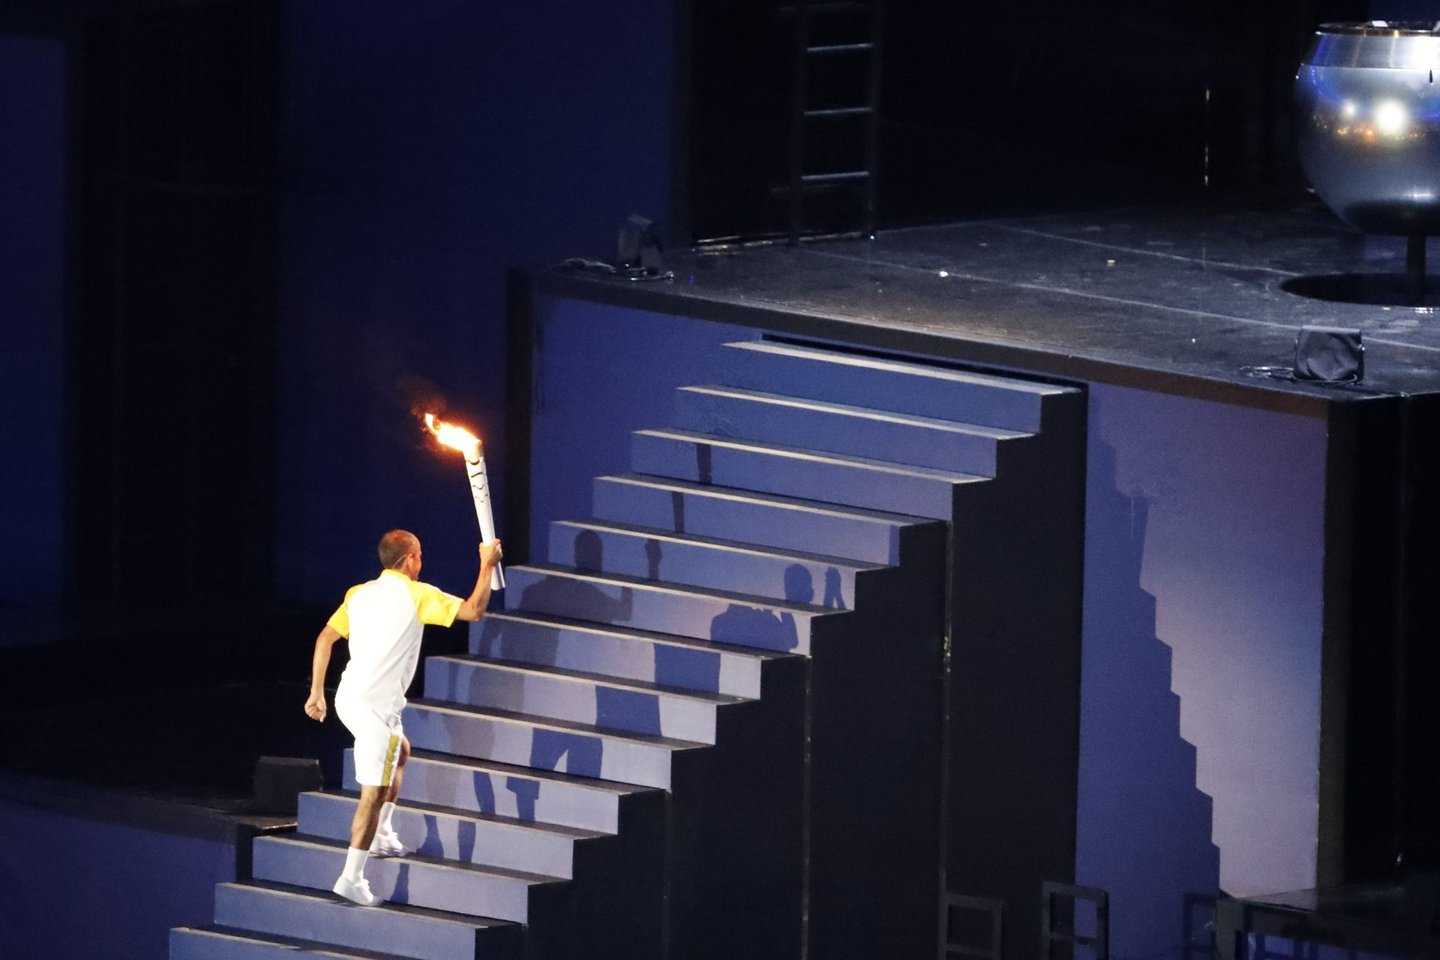 Former Brazilian athlete Vanderlei Cordeiro de Lima lights the Olympic cauldron with the Olympic torch during the opening ceremony of the Rio 2016 Olympic Games at Maracana Stadium in Rio de Janeiro on August 5, 2016. / AFP / Thomas COEX (Photo credit should read THOMAS COEX/AFP/Getty Images)